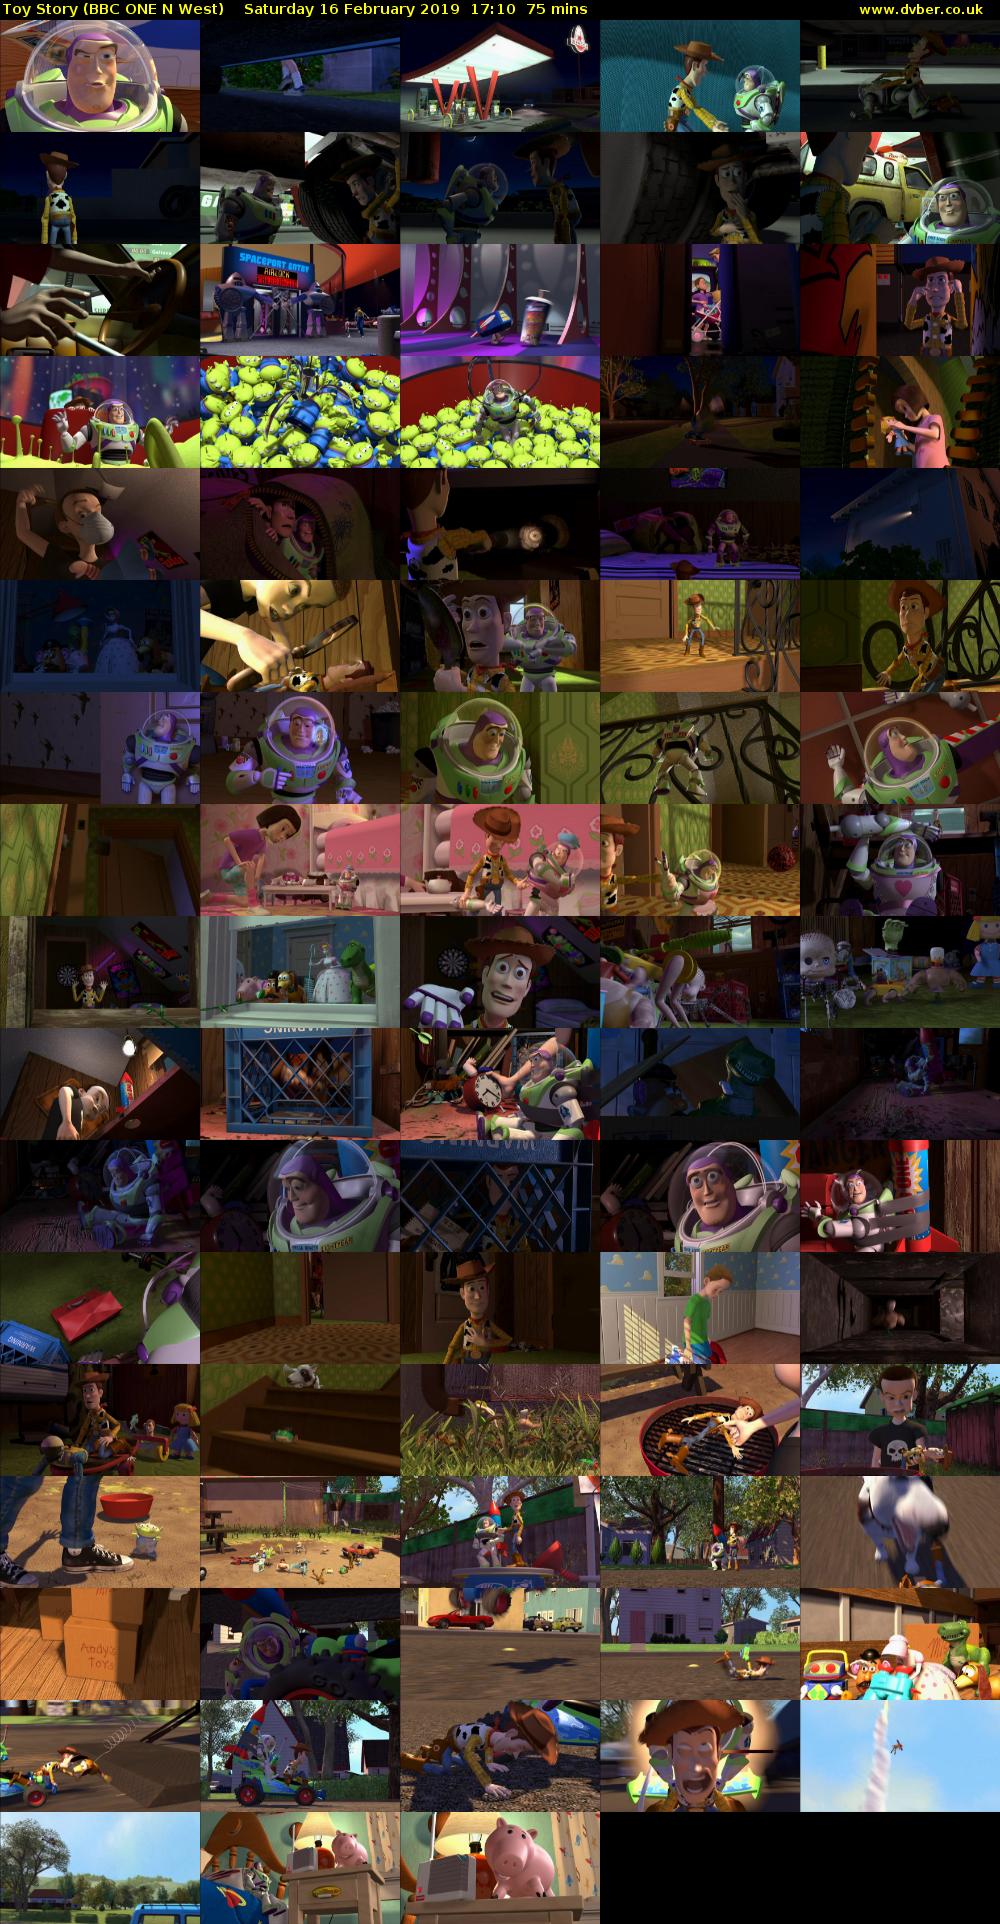 Toy Story Bbc One 2019 02 16 1710